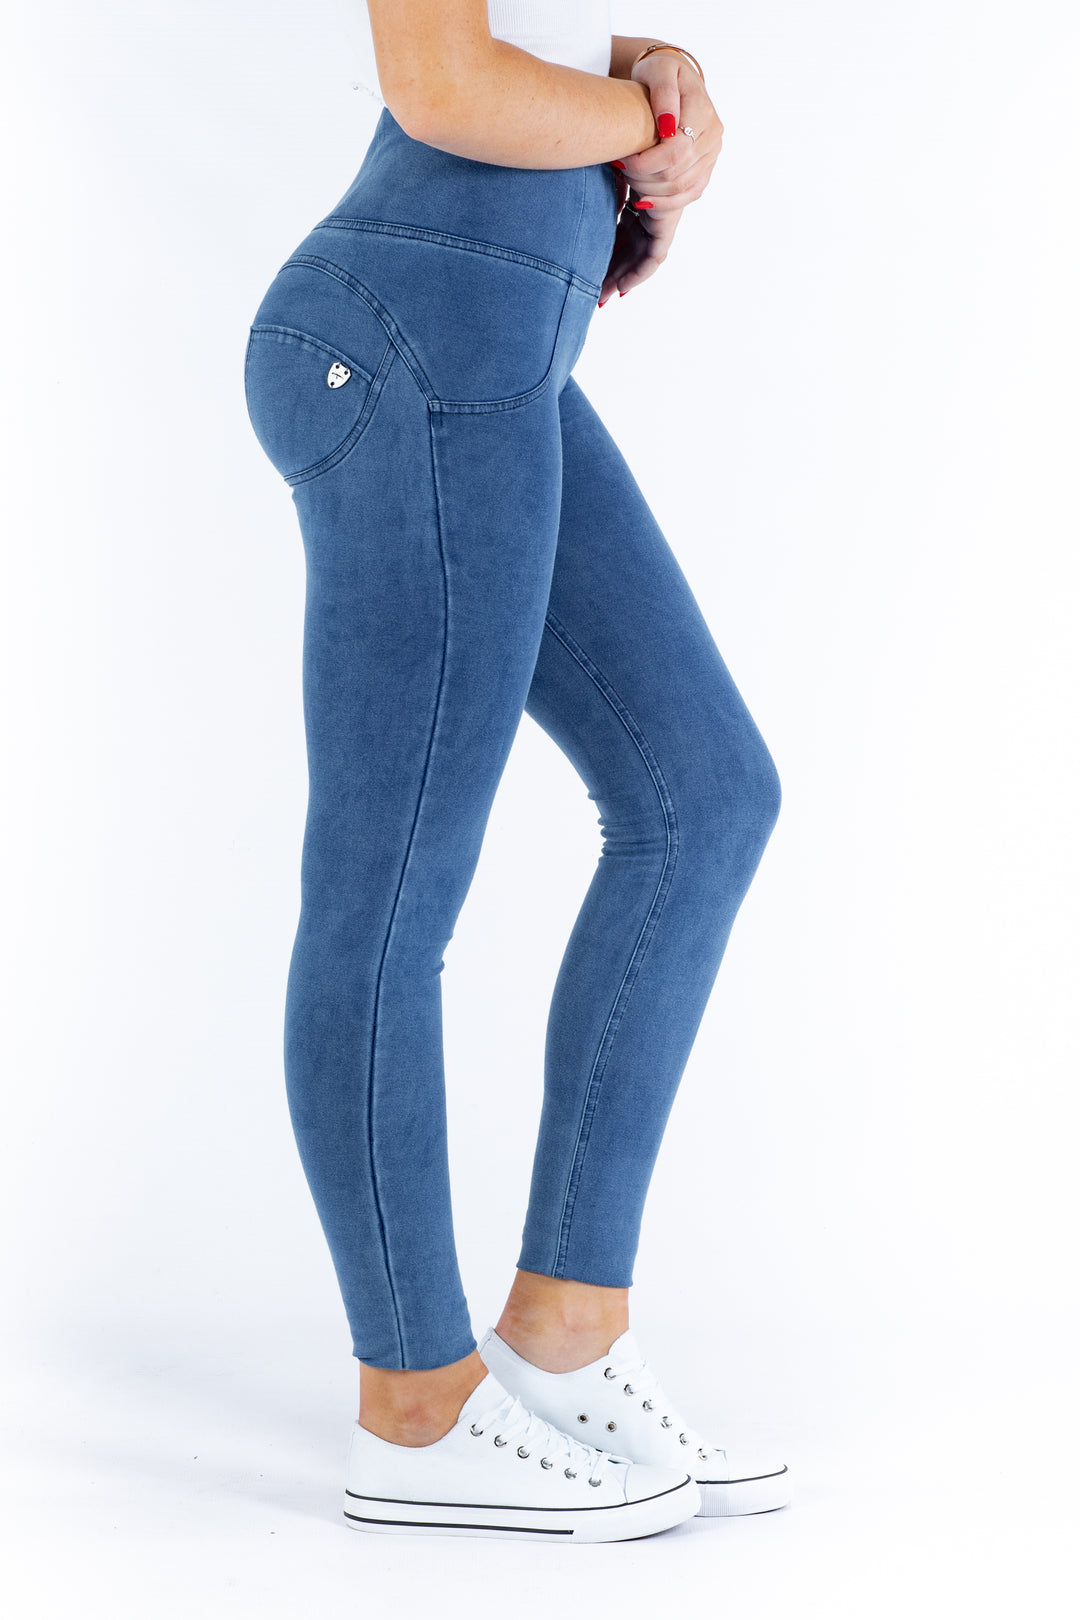 High waist Butt lifting Shaping jeans/Jeggings - Light blueaos-init aos-animate